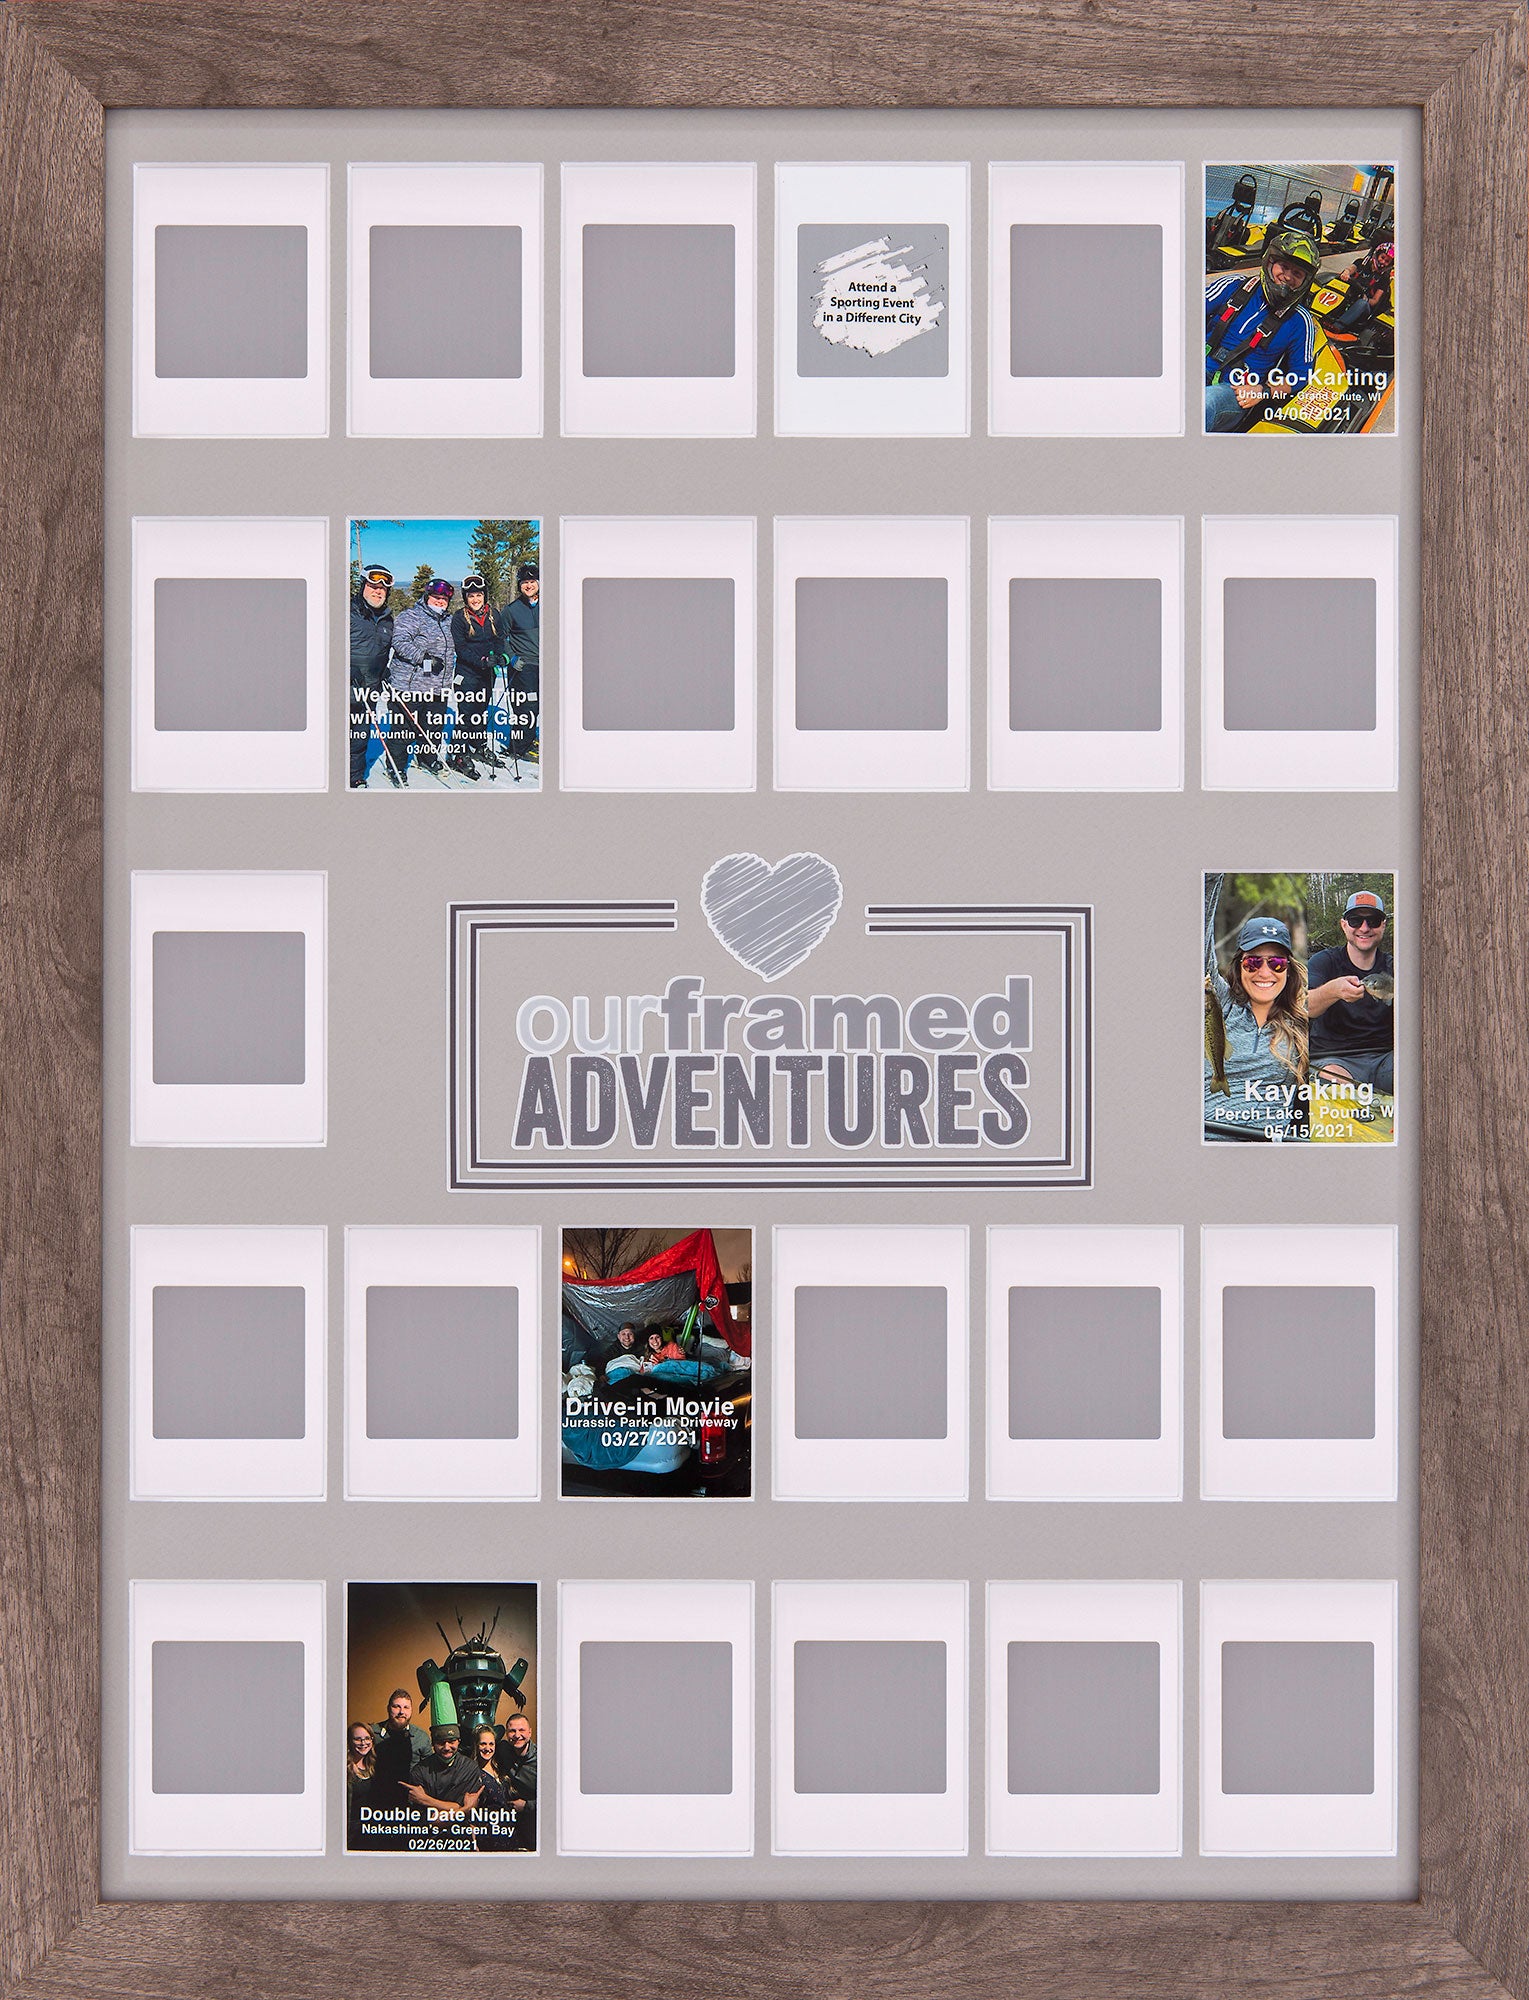 Adventure Challenge Review: Scratch Off Date Ideas